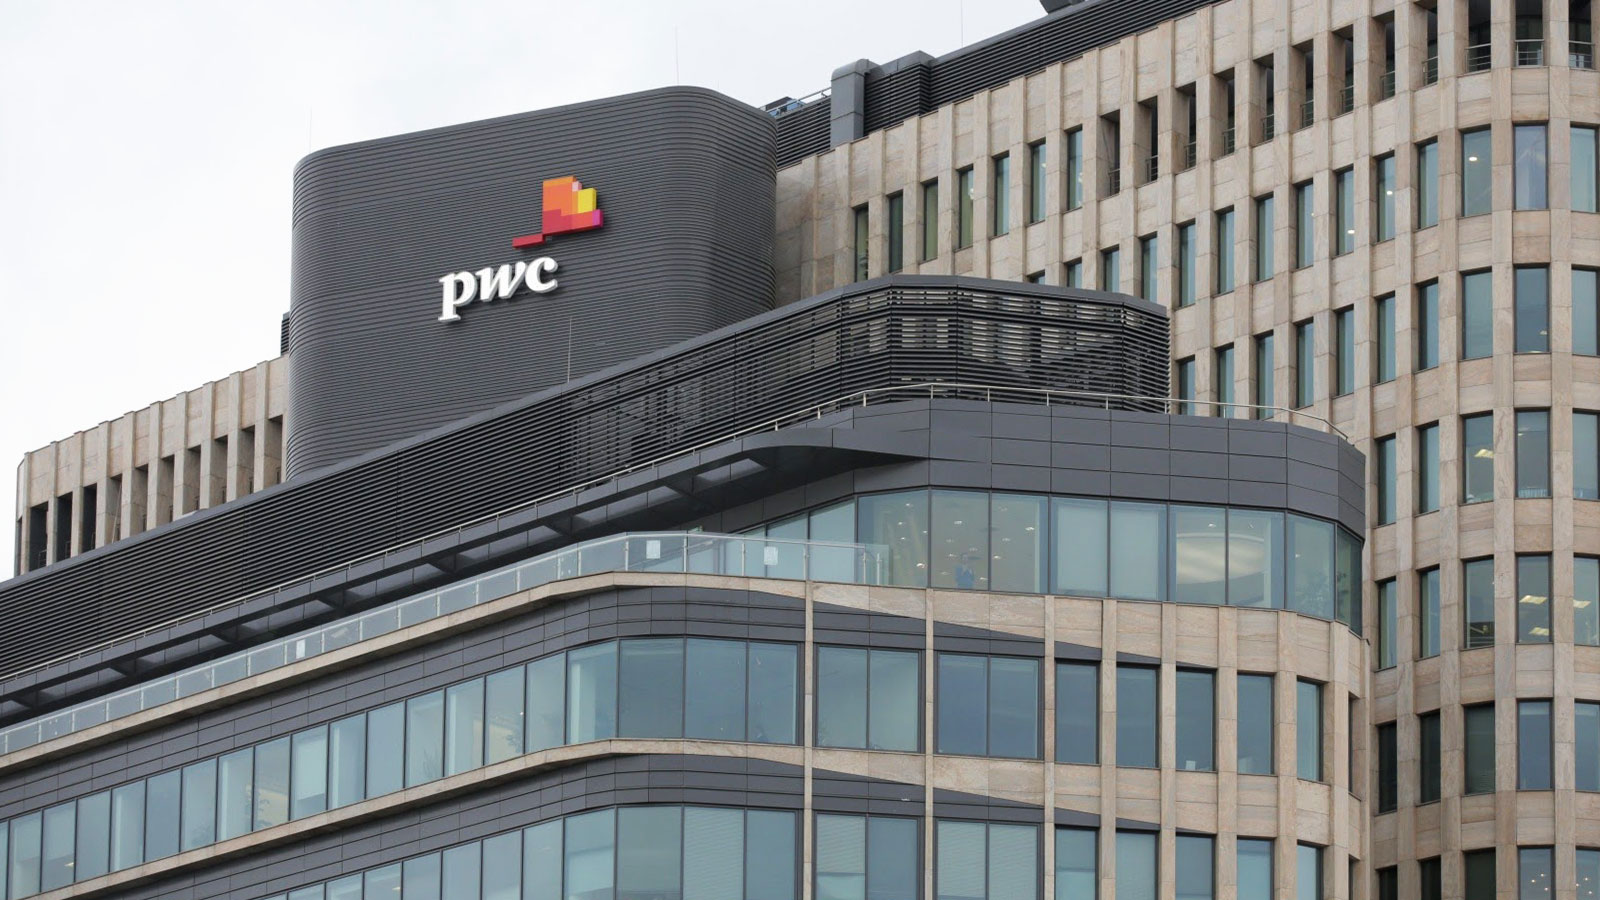 PwC: 2019 WILL BE A POSITIVE YEAR FOR CRYPTOCURRENCIES